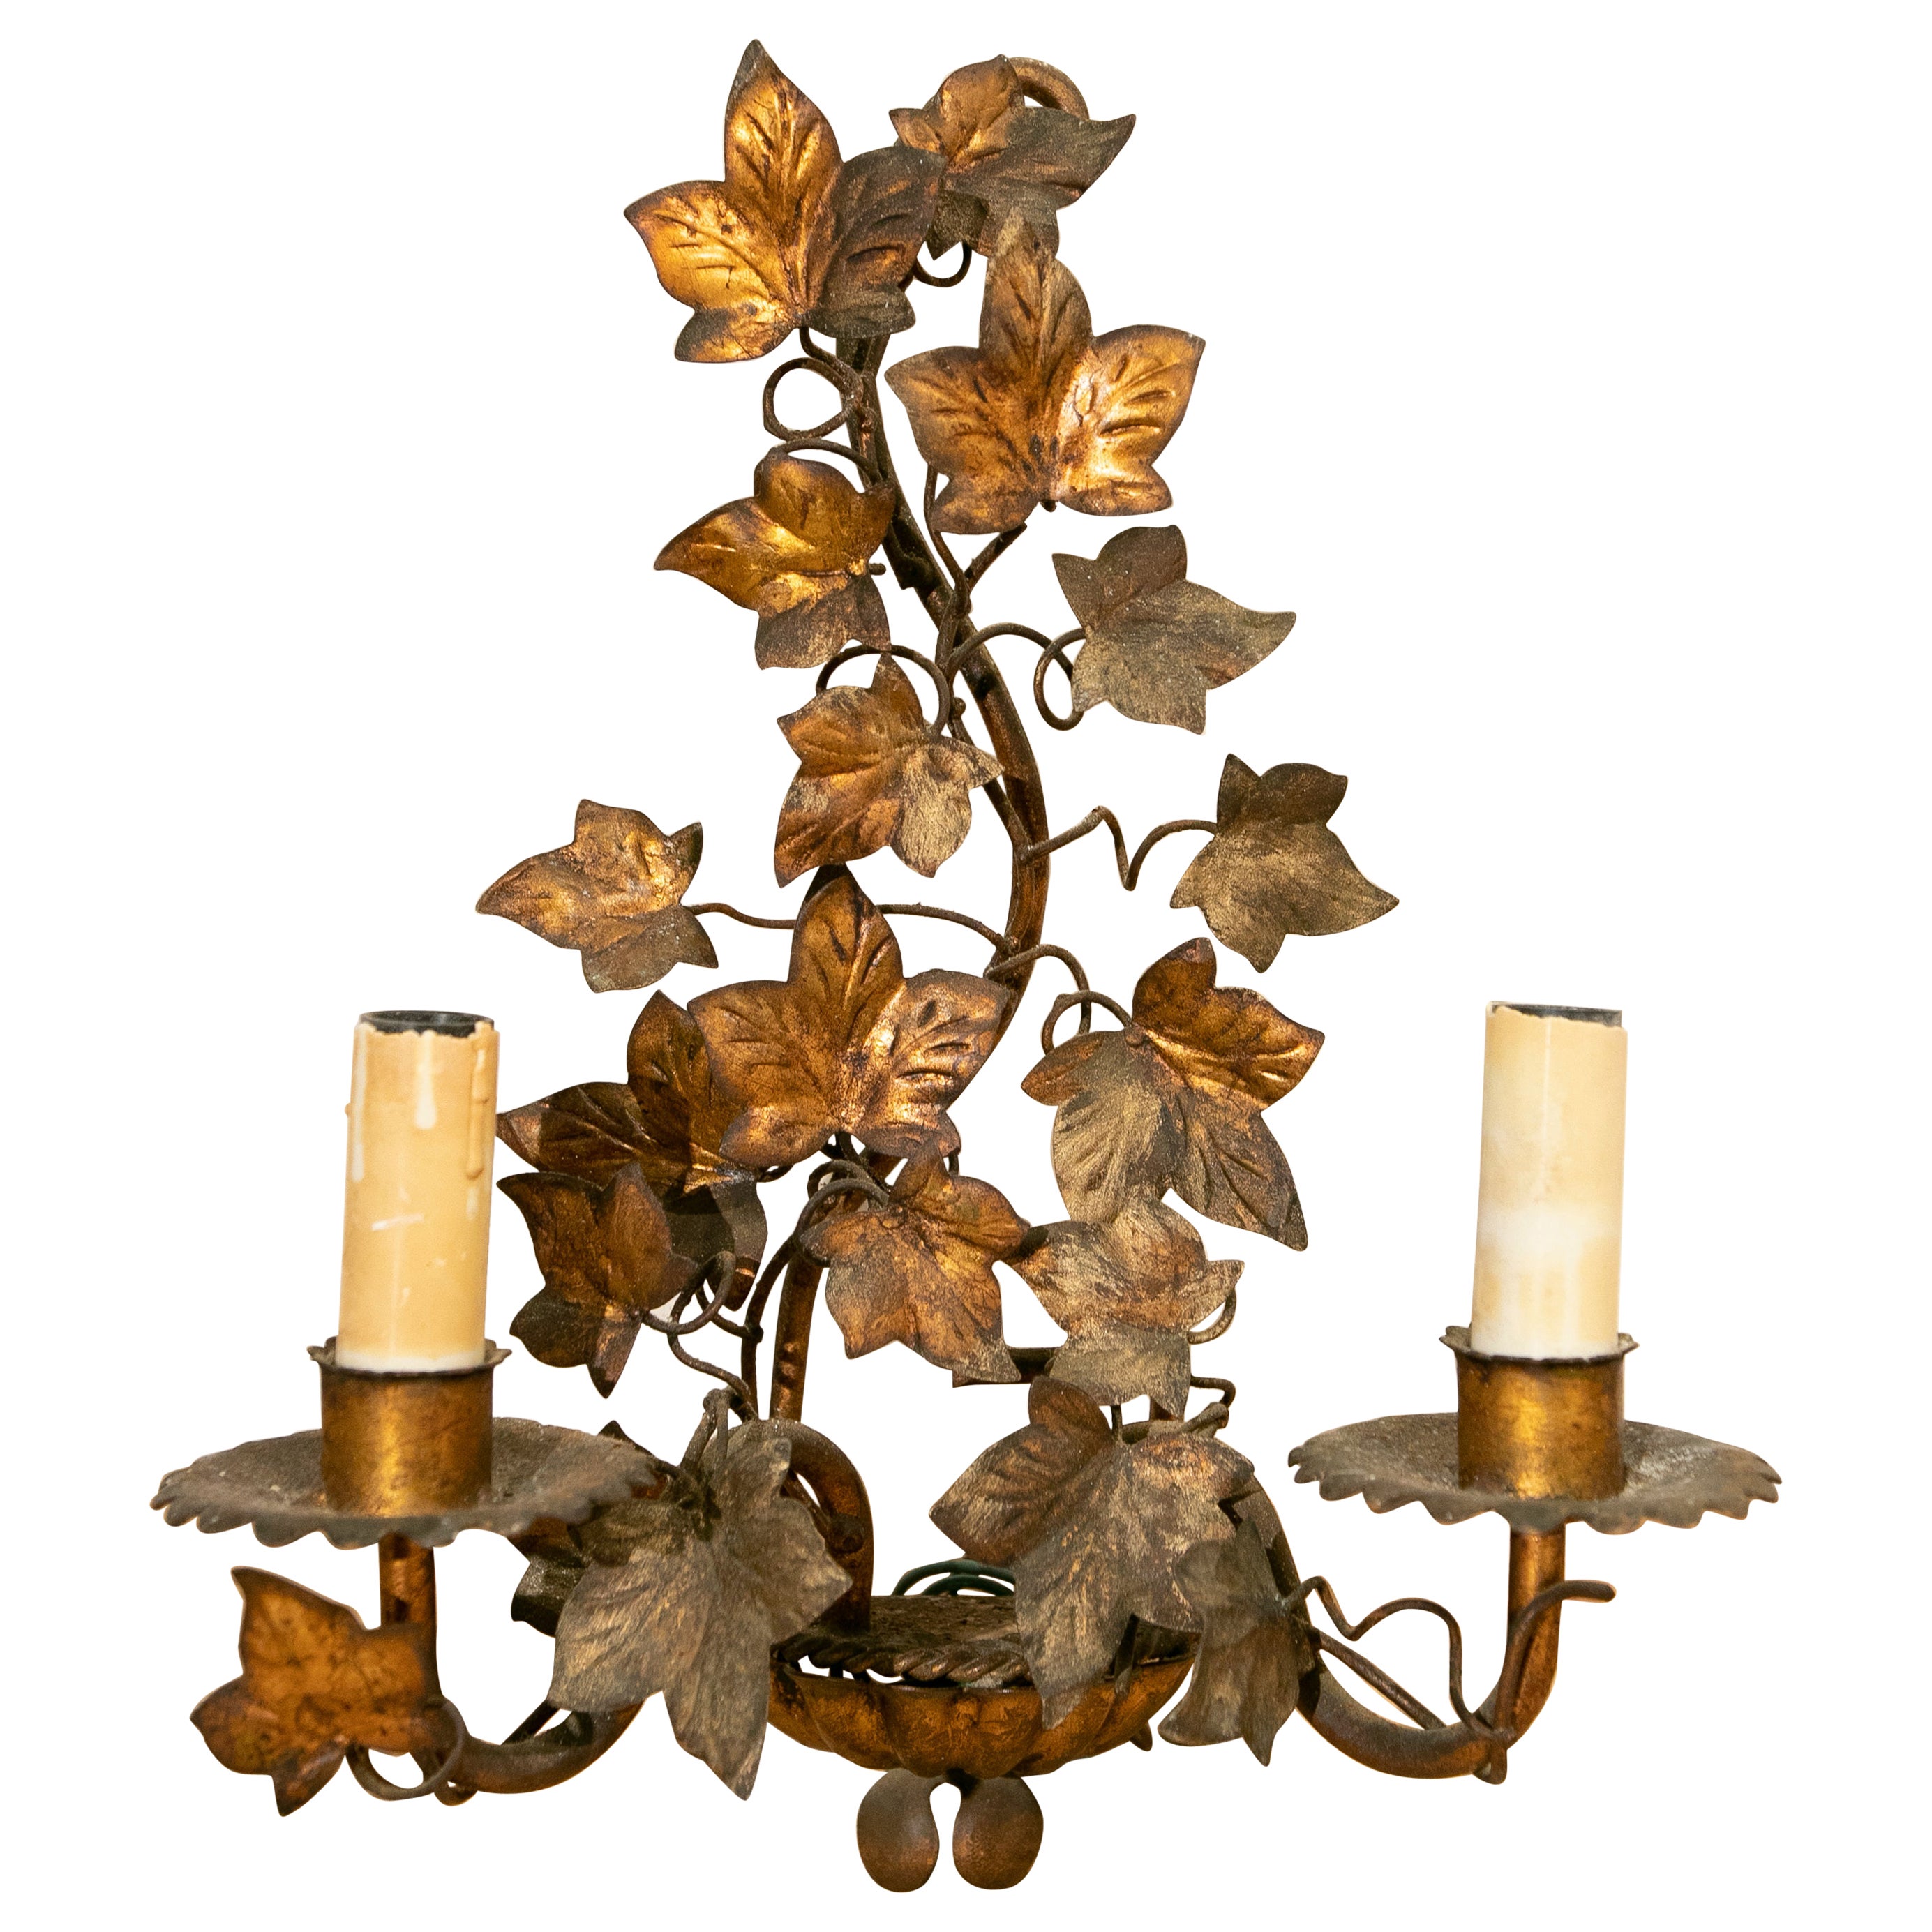 1970s Spanish Wall Lamp in Gilded Metal in the Shape of Branches and Leaves